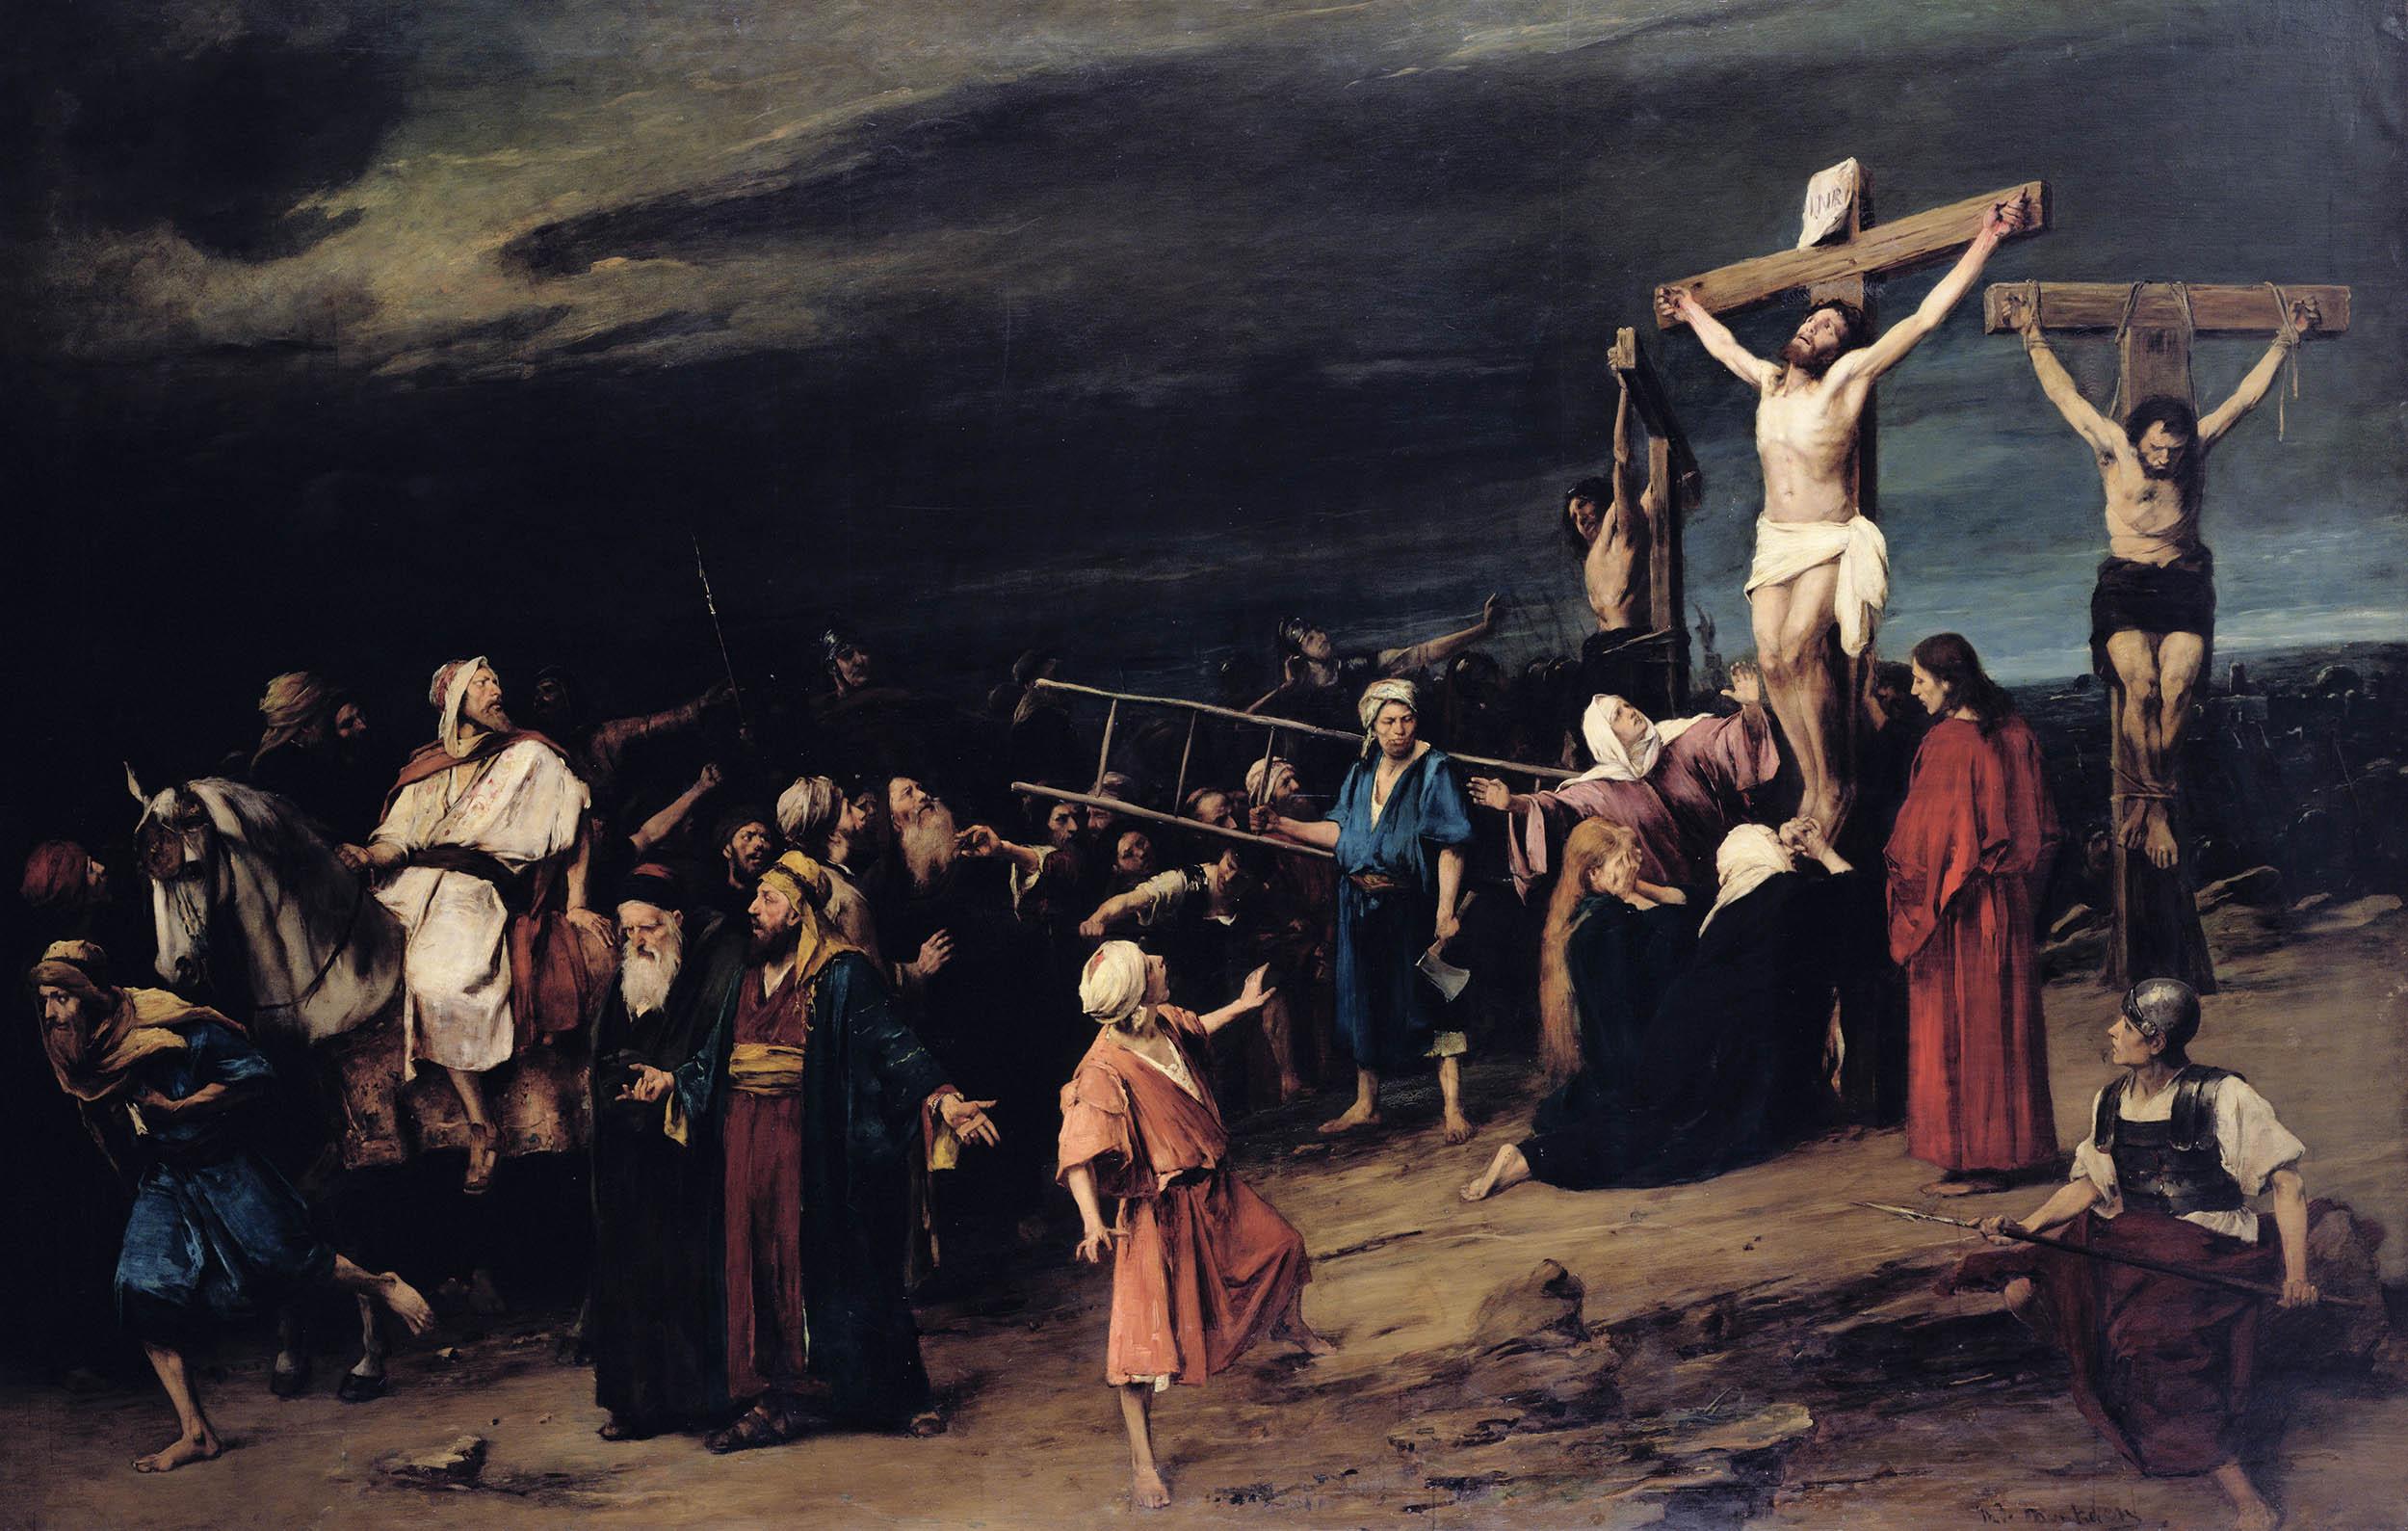 stations of the cross 1